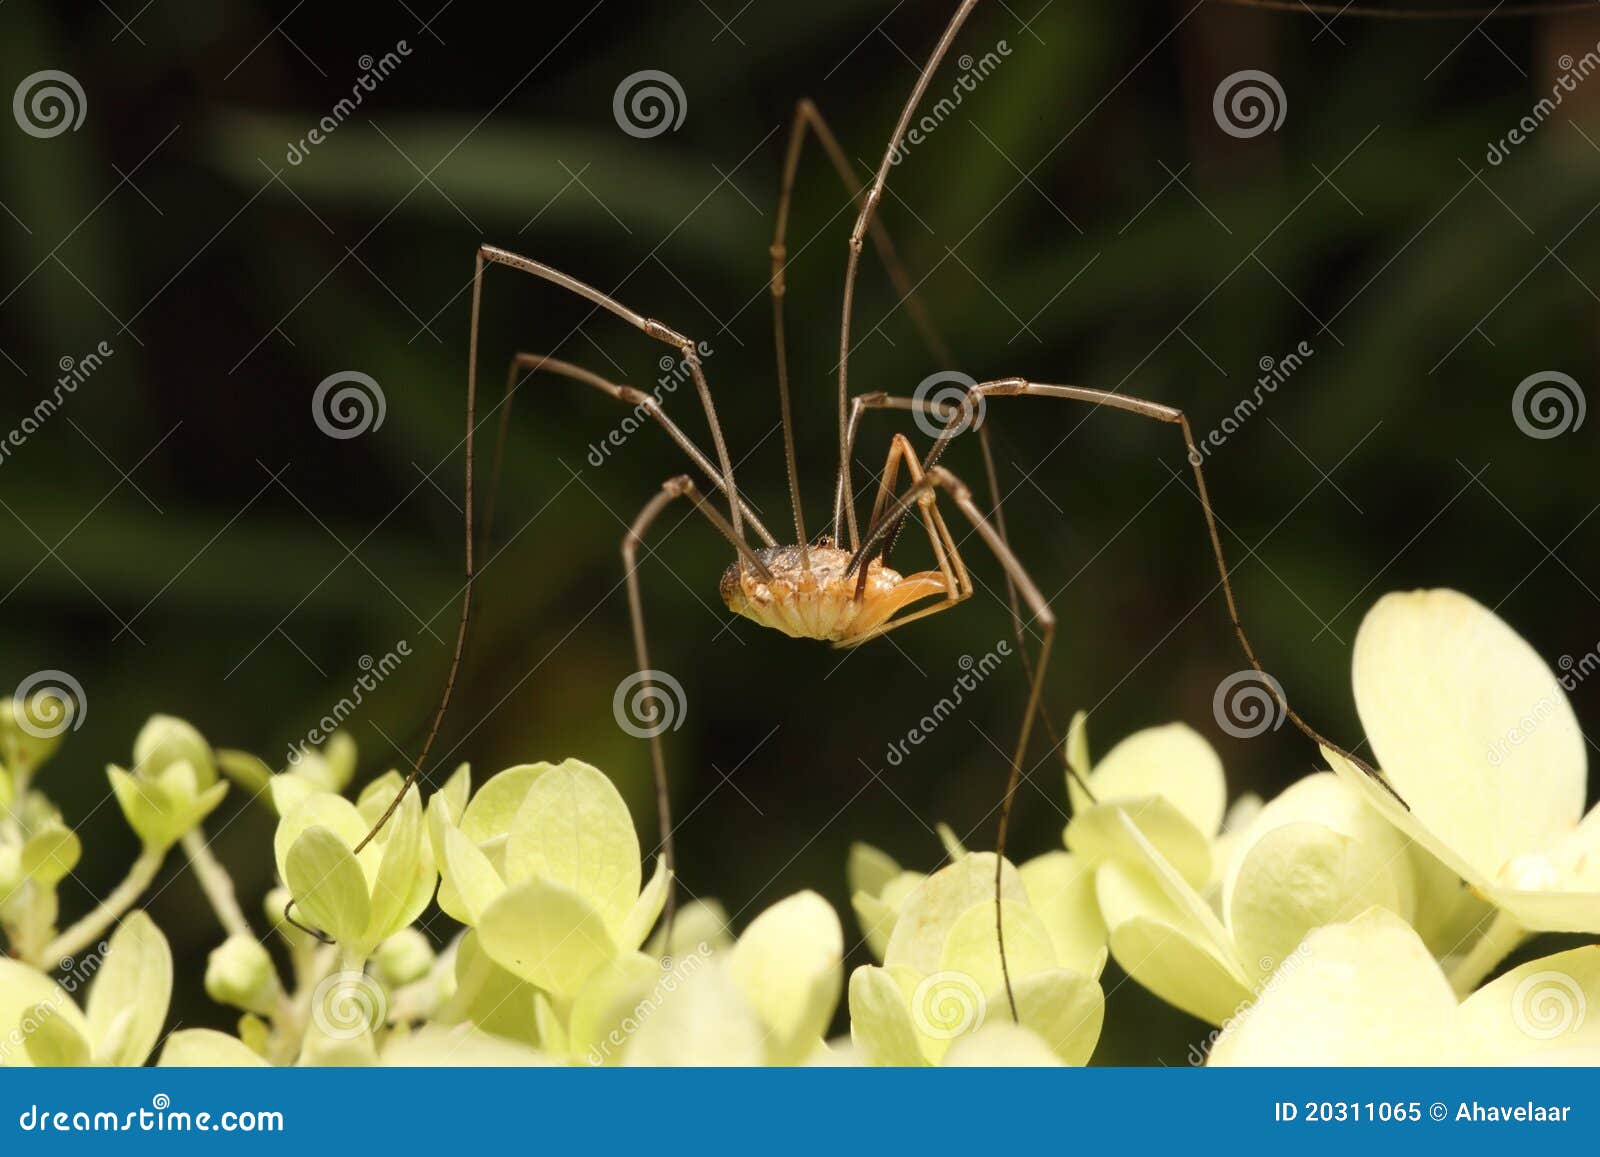 428 Opiliones Spider Stock Photos - Free & Royalty-Free Stock Photos from  Dreamstime